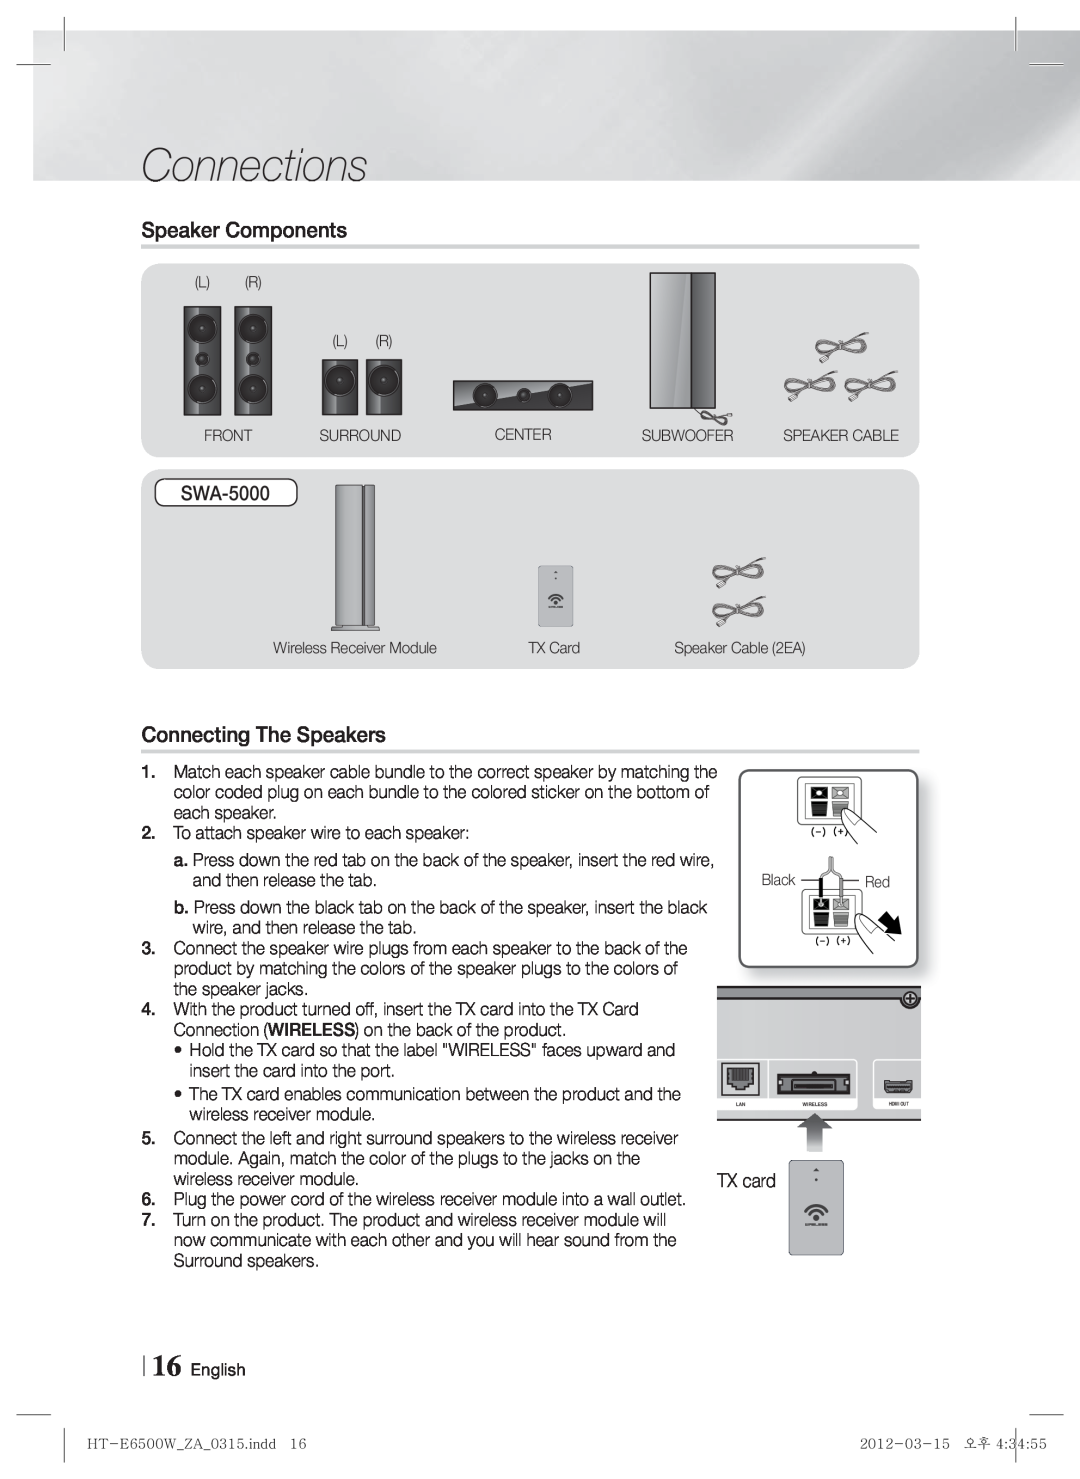 Samsung HT-E6500W, HTE6500WZA Connections, Speaker Components, Connecting The Speakers, SWA-5000, wireless receiver module 